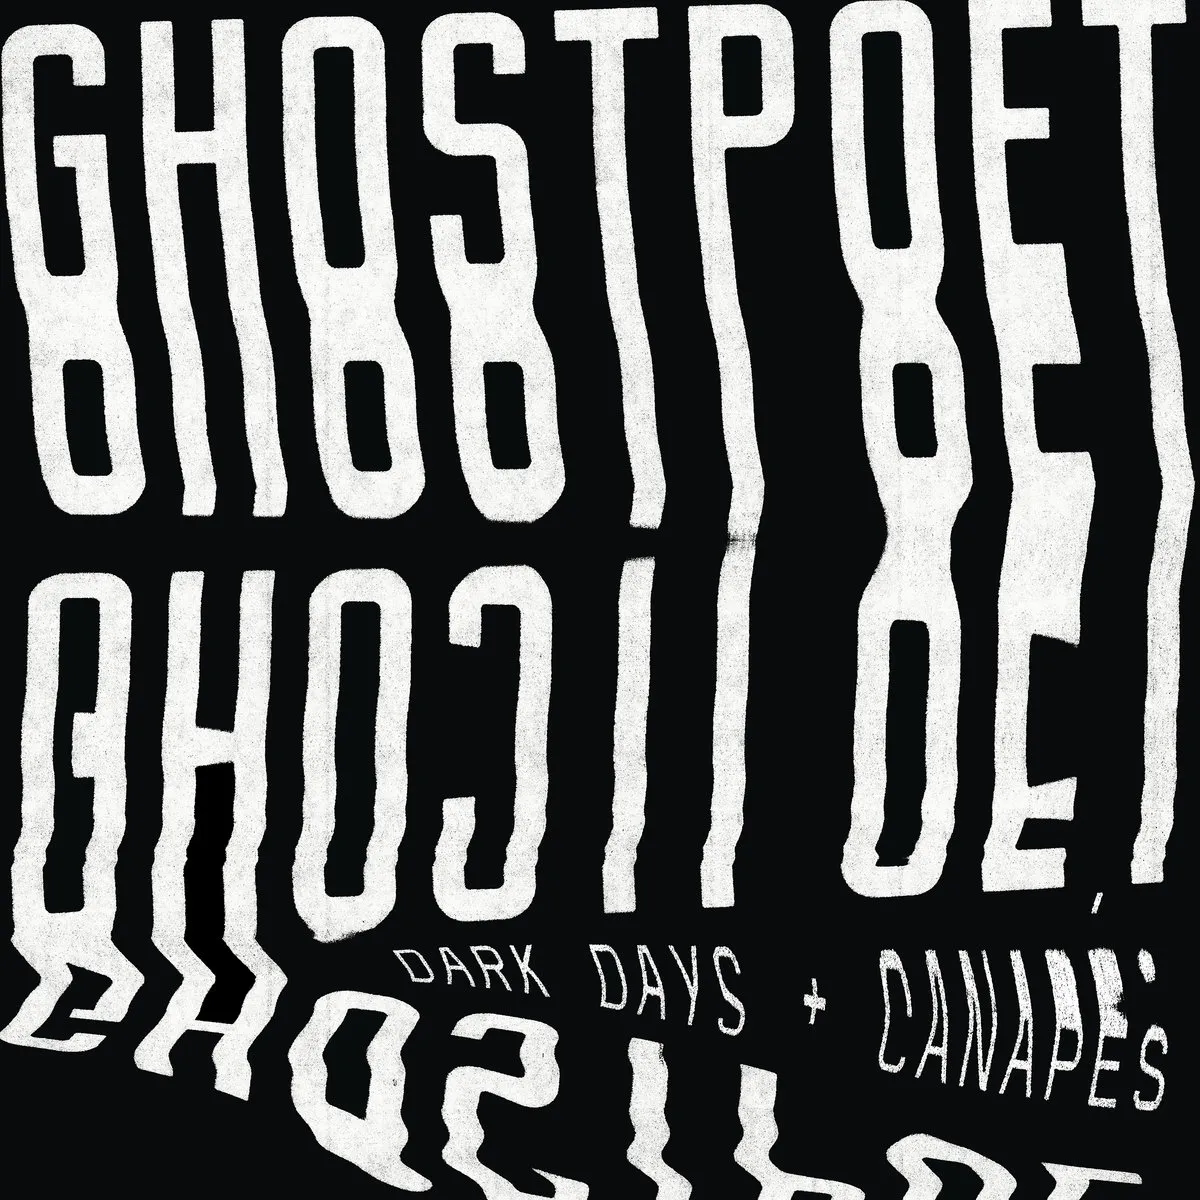 <strong>Ghostpoet - Dark Days and Canapes (Black Friday 2021)</strong> (Vinyl LP - clear)